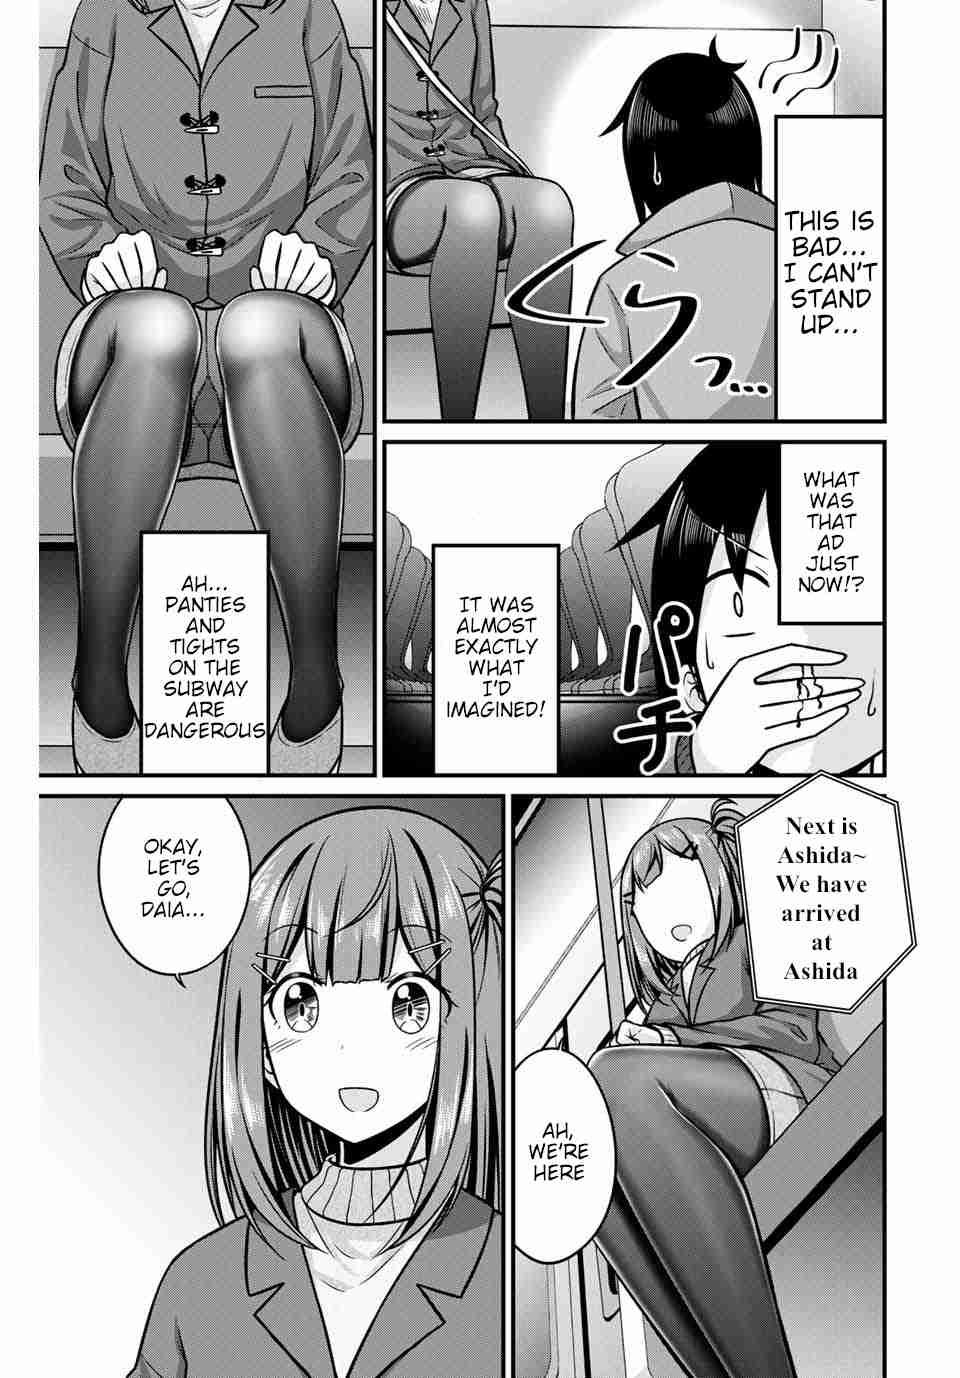 Arigatights! Ch. 28 The Subway and Tights